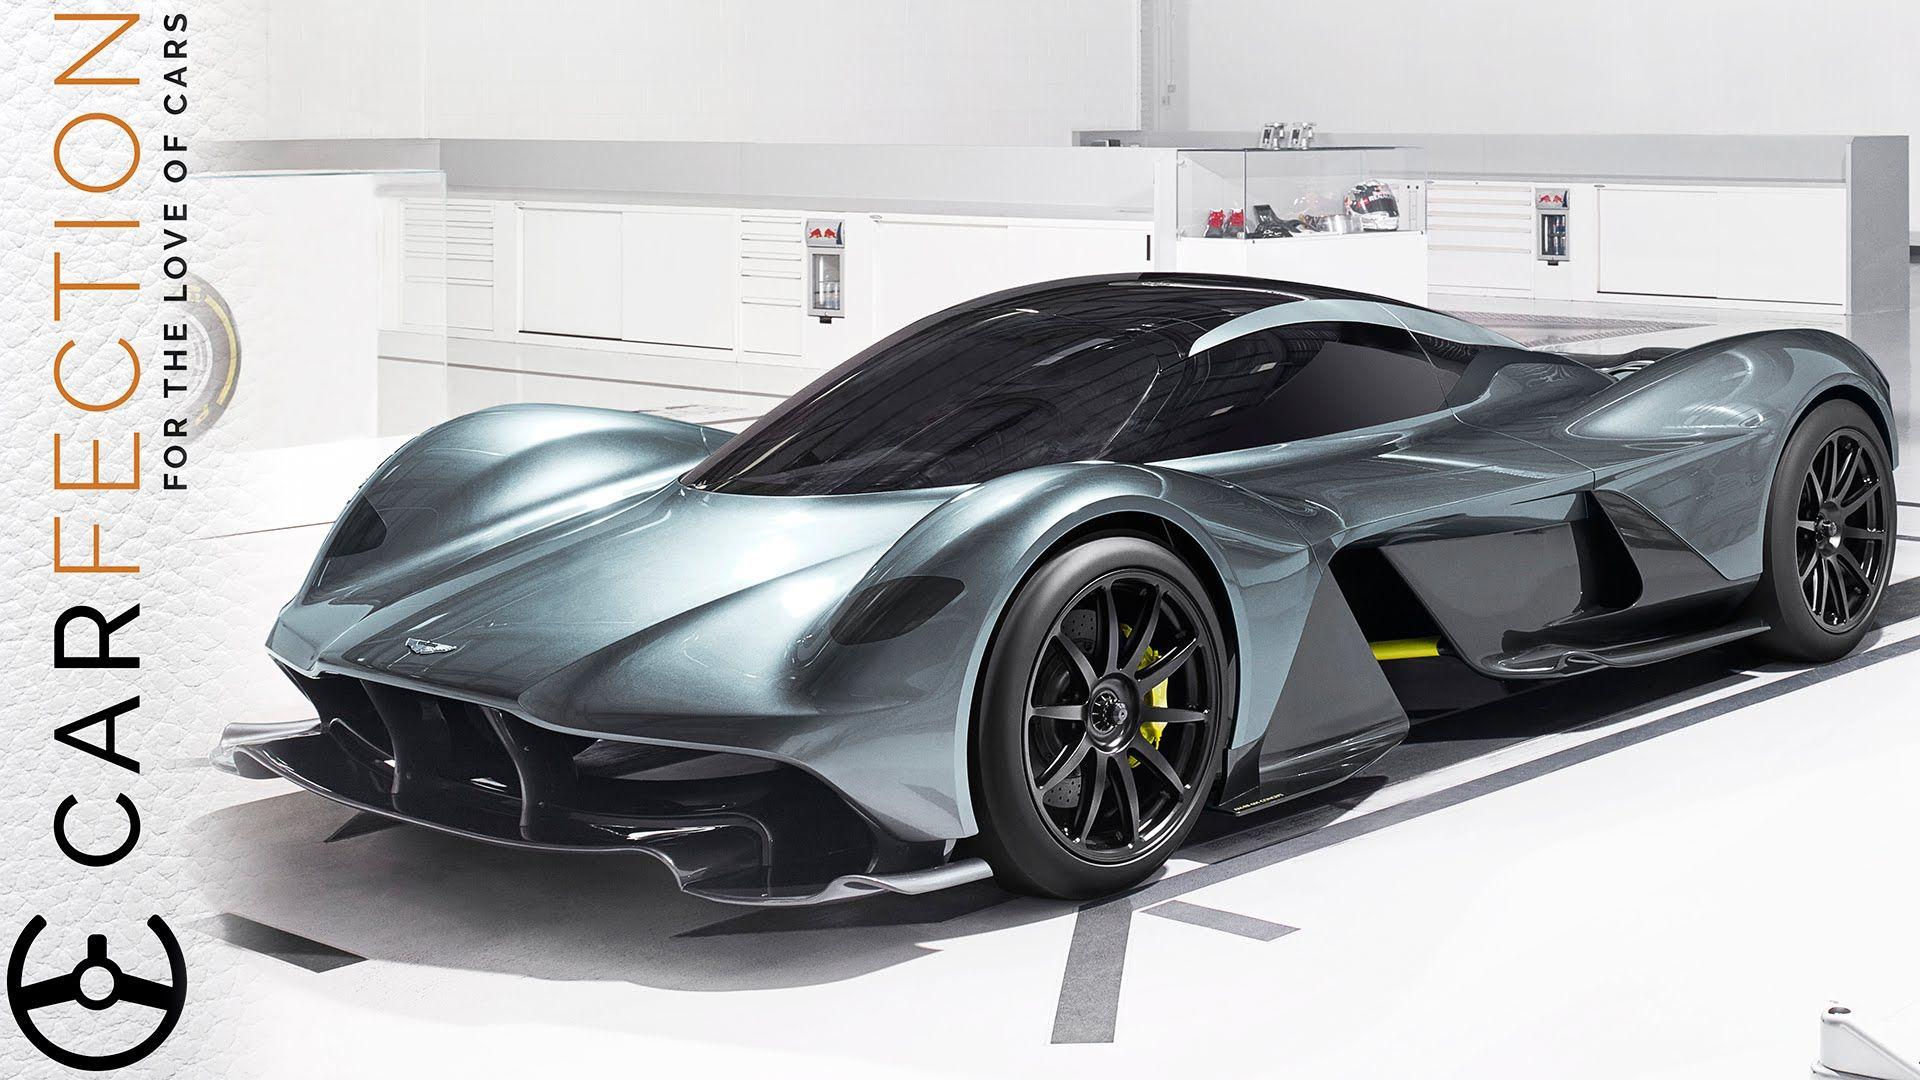 Aston Martin Valkyrie AM RB 001: Aston Martin And Red Bull Racing